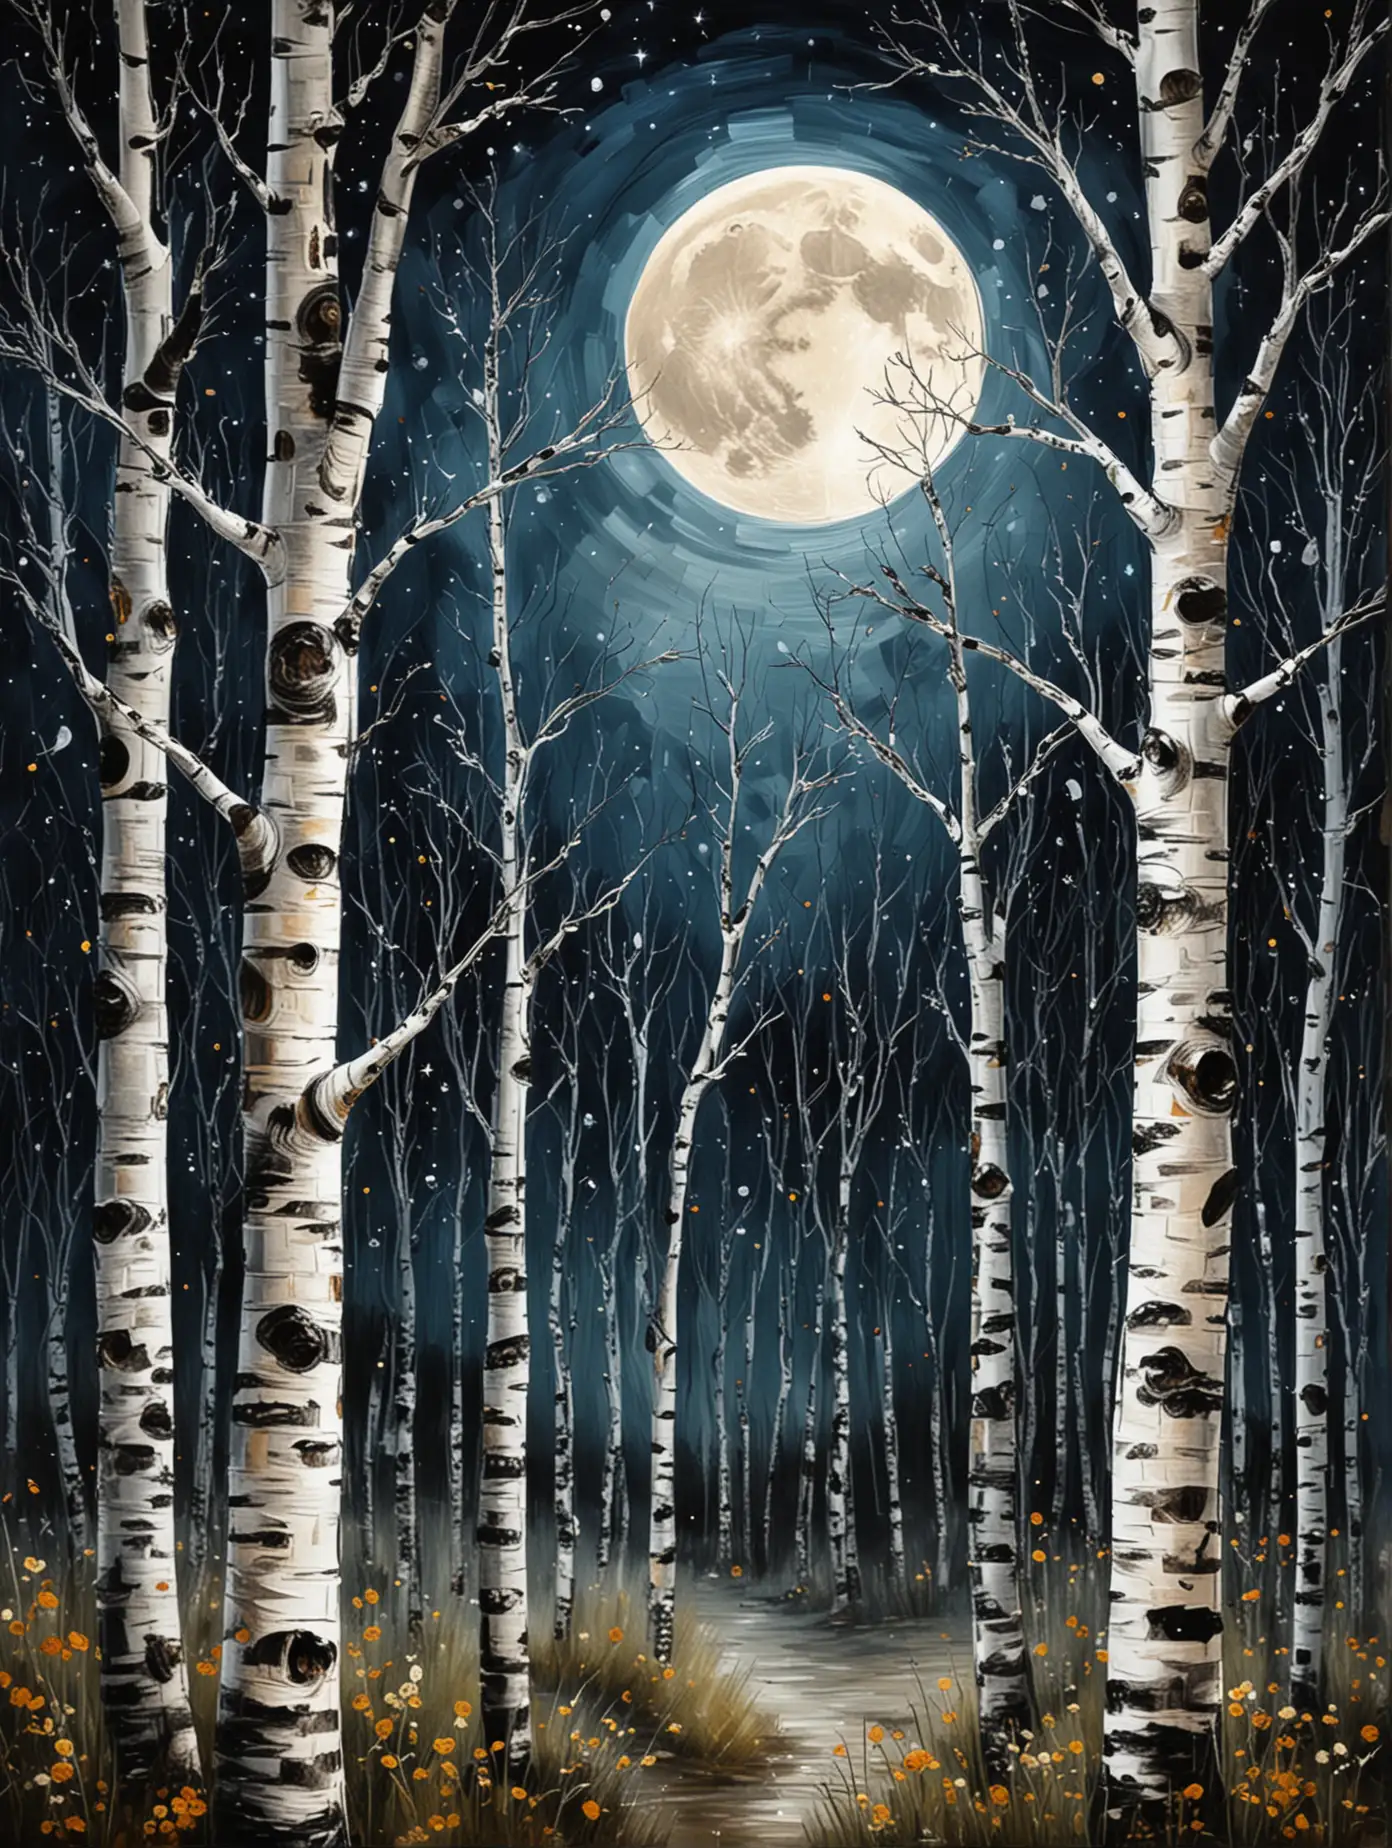 Birch Trees Art at Night with Moon